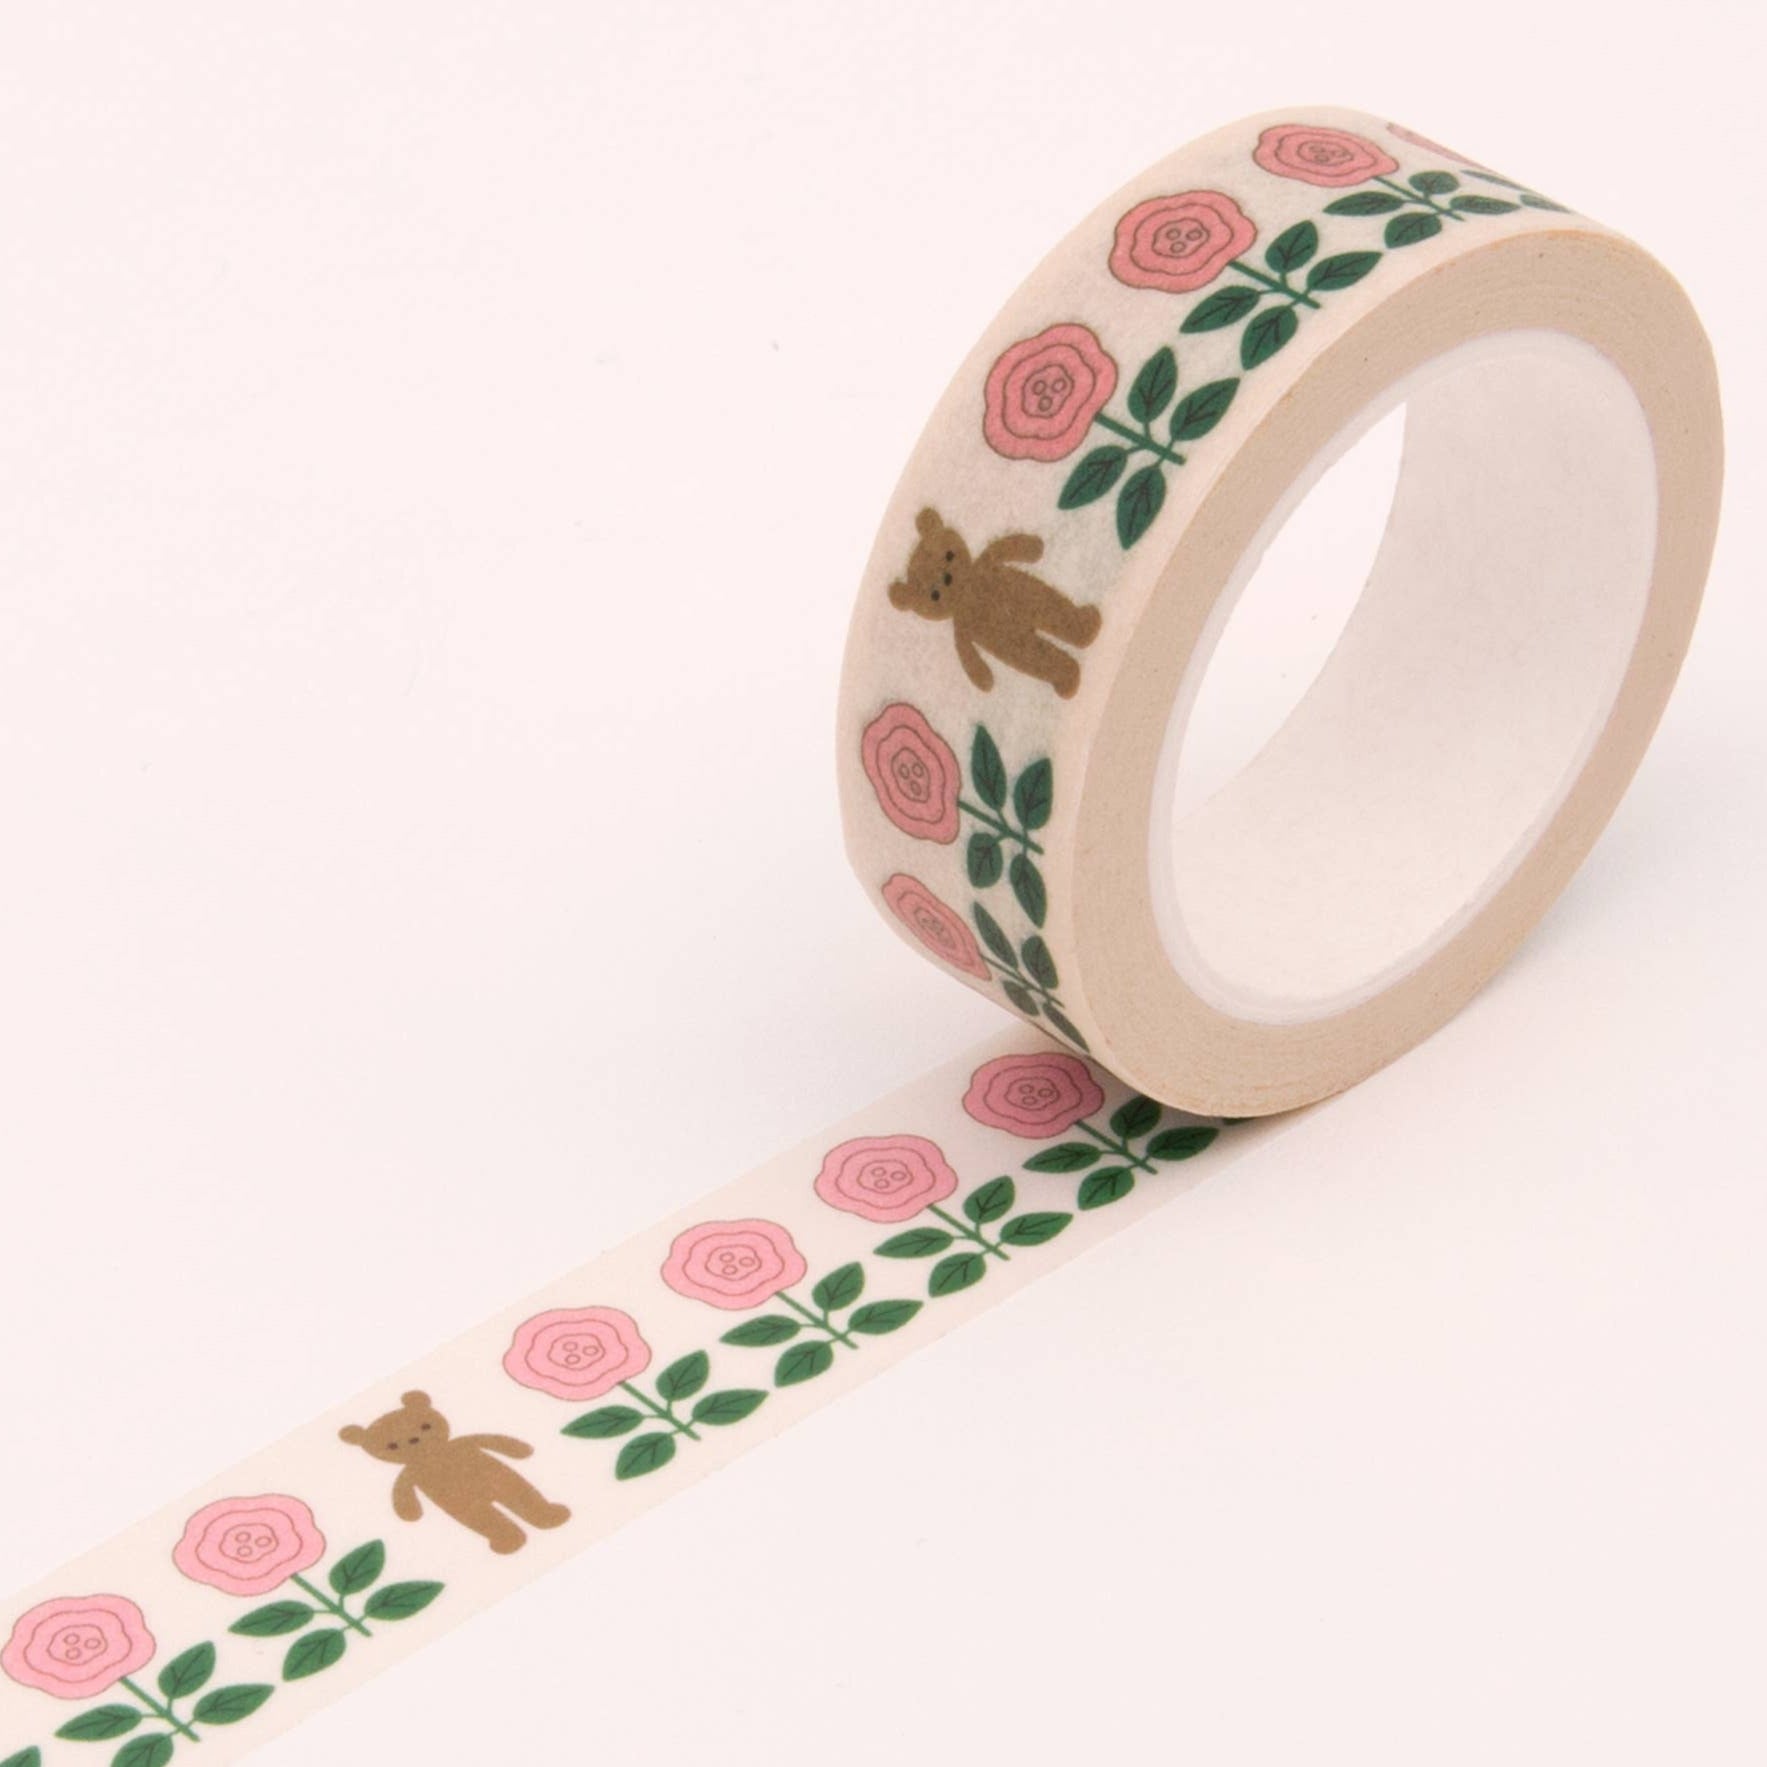 Flower and Bear Washi Tape